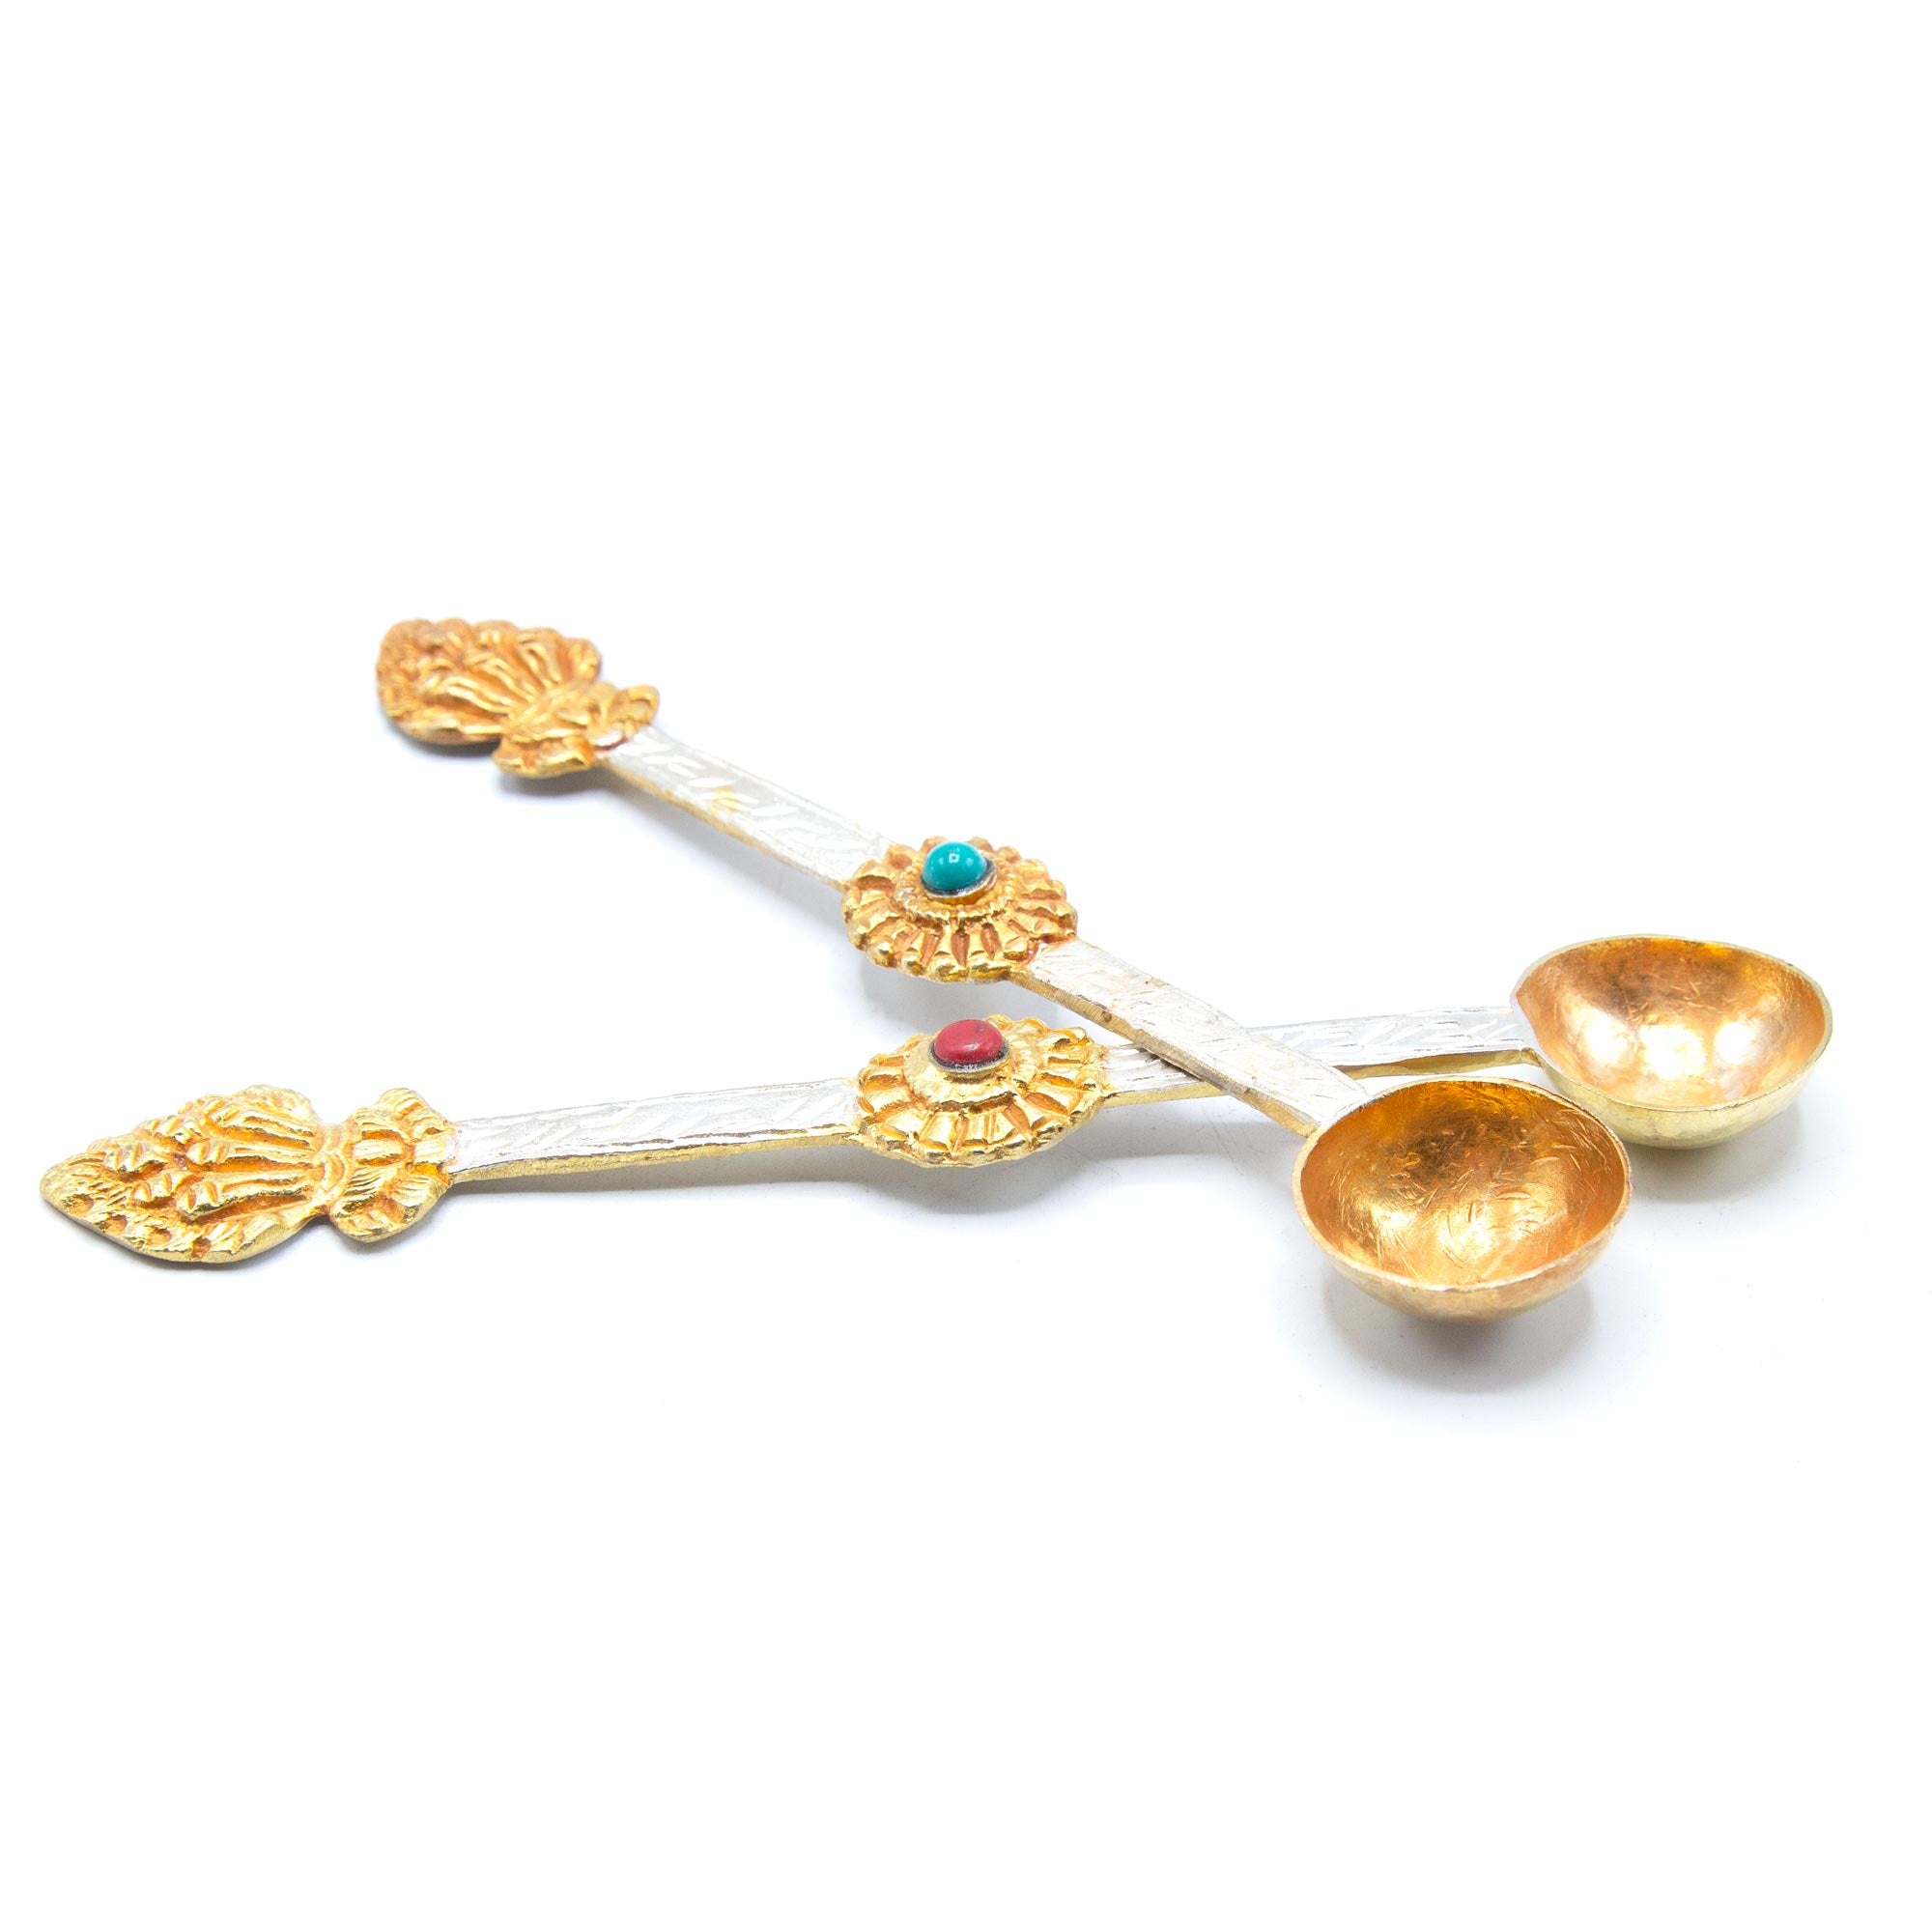 Silver and Gold Brushed Ritual Spoon Set - 6